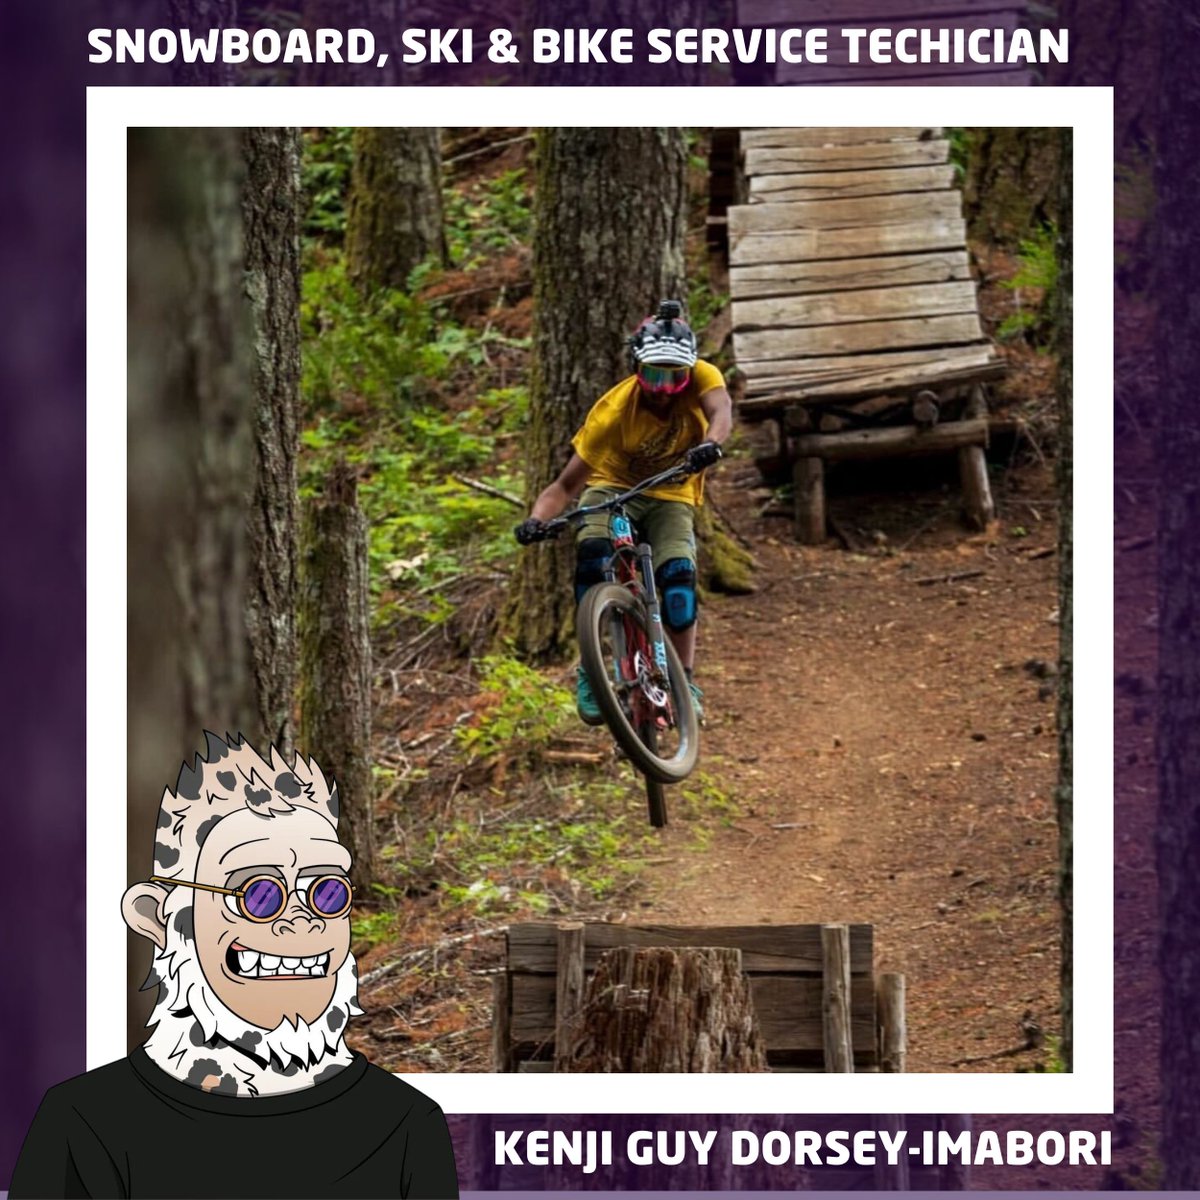 10/12 🛠️ In addition to our amazing coaches we also have 2 technicians on hand to answer any technical, gear related questions. 

@ScorginSki is a snowboard technician for GB snowsports and Kenji a USA team snowboard technician and mountain bike specialist.